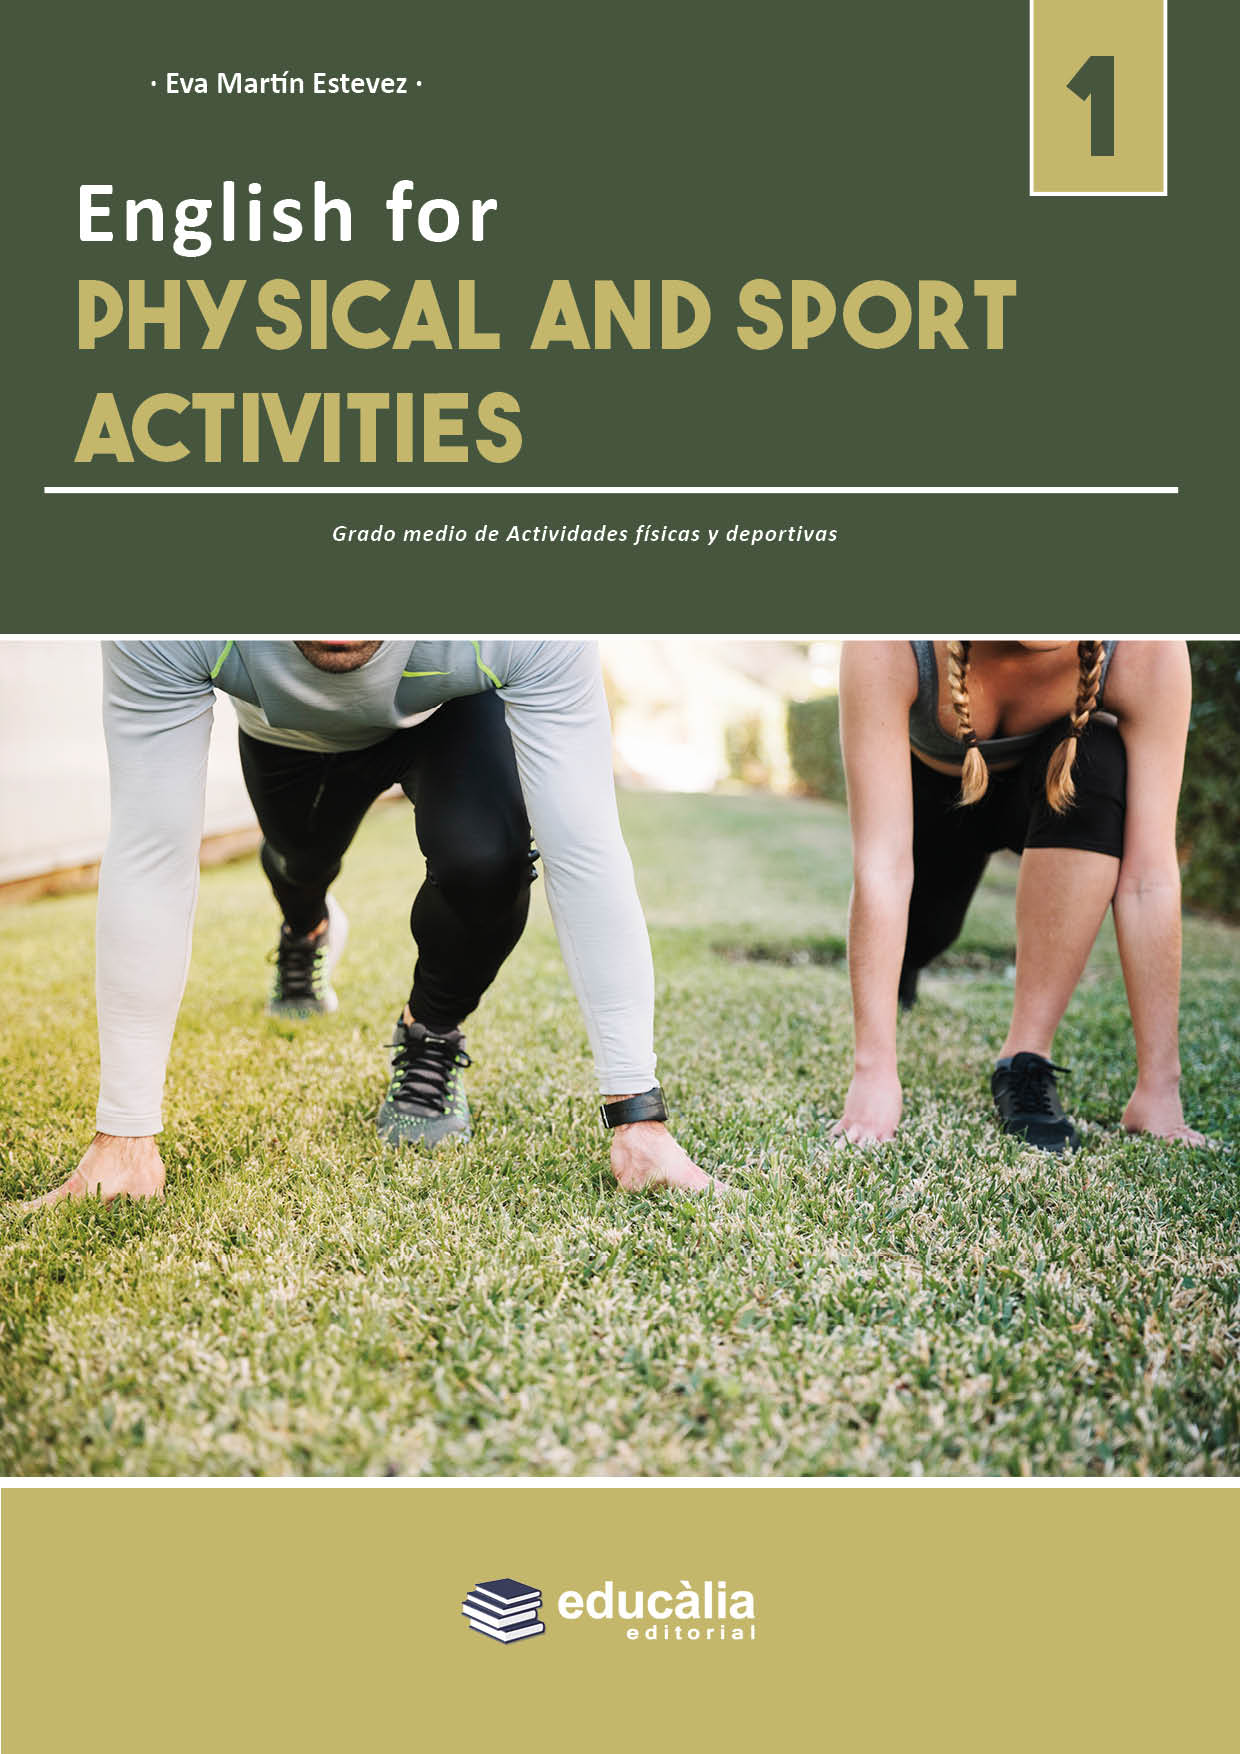 Advanced English for Physical activities